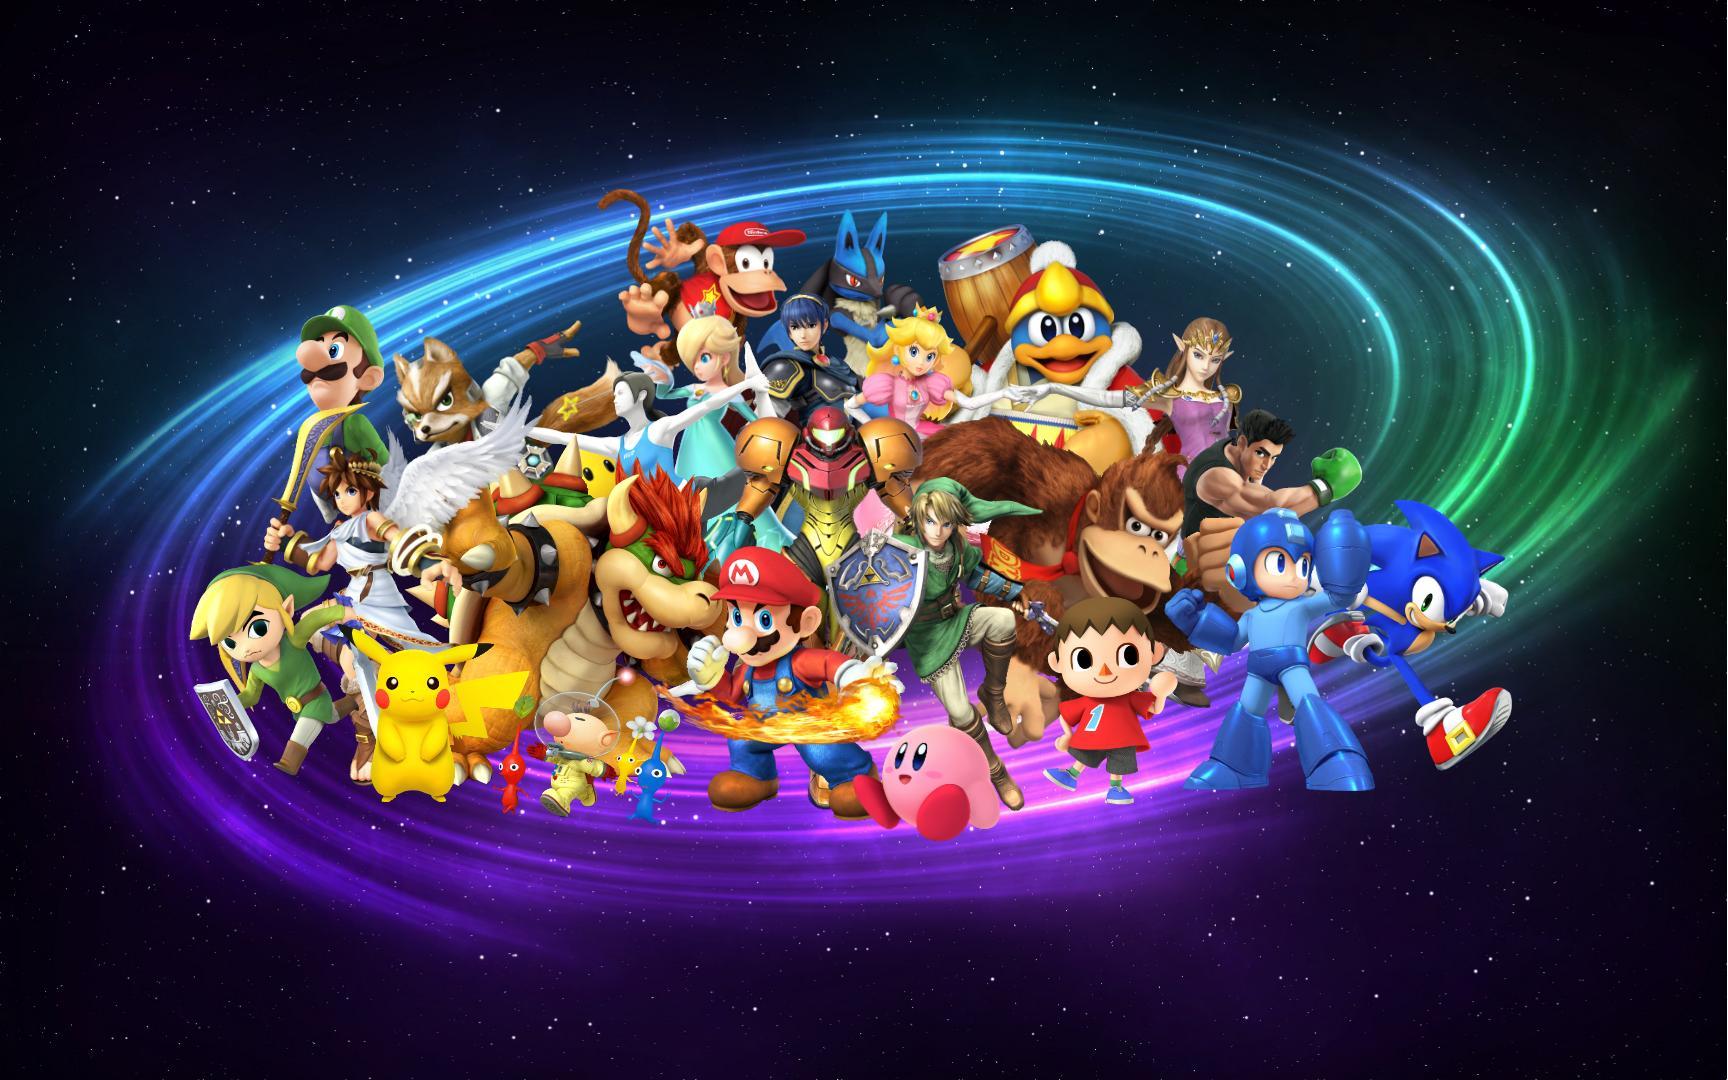 New Super Smash Bros. Wallpaper (Updated with Diddy Kong) 1080p